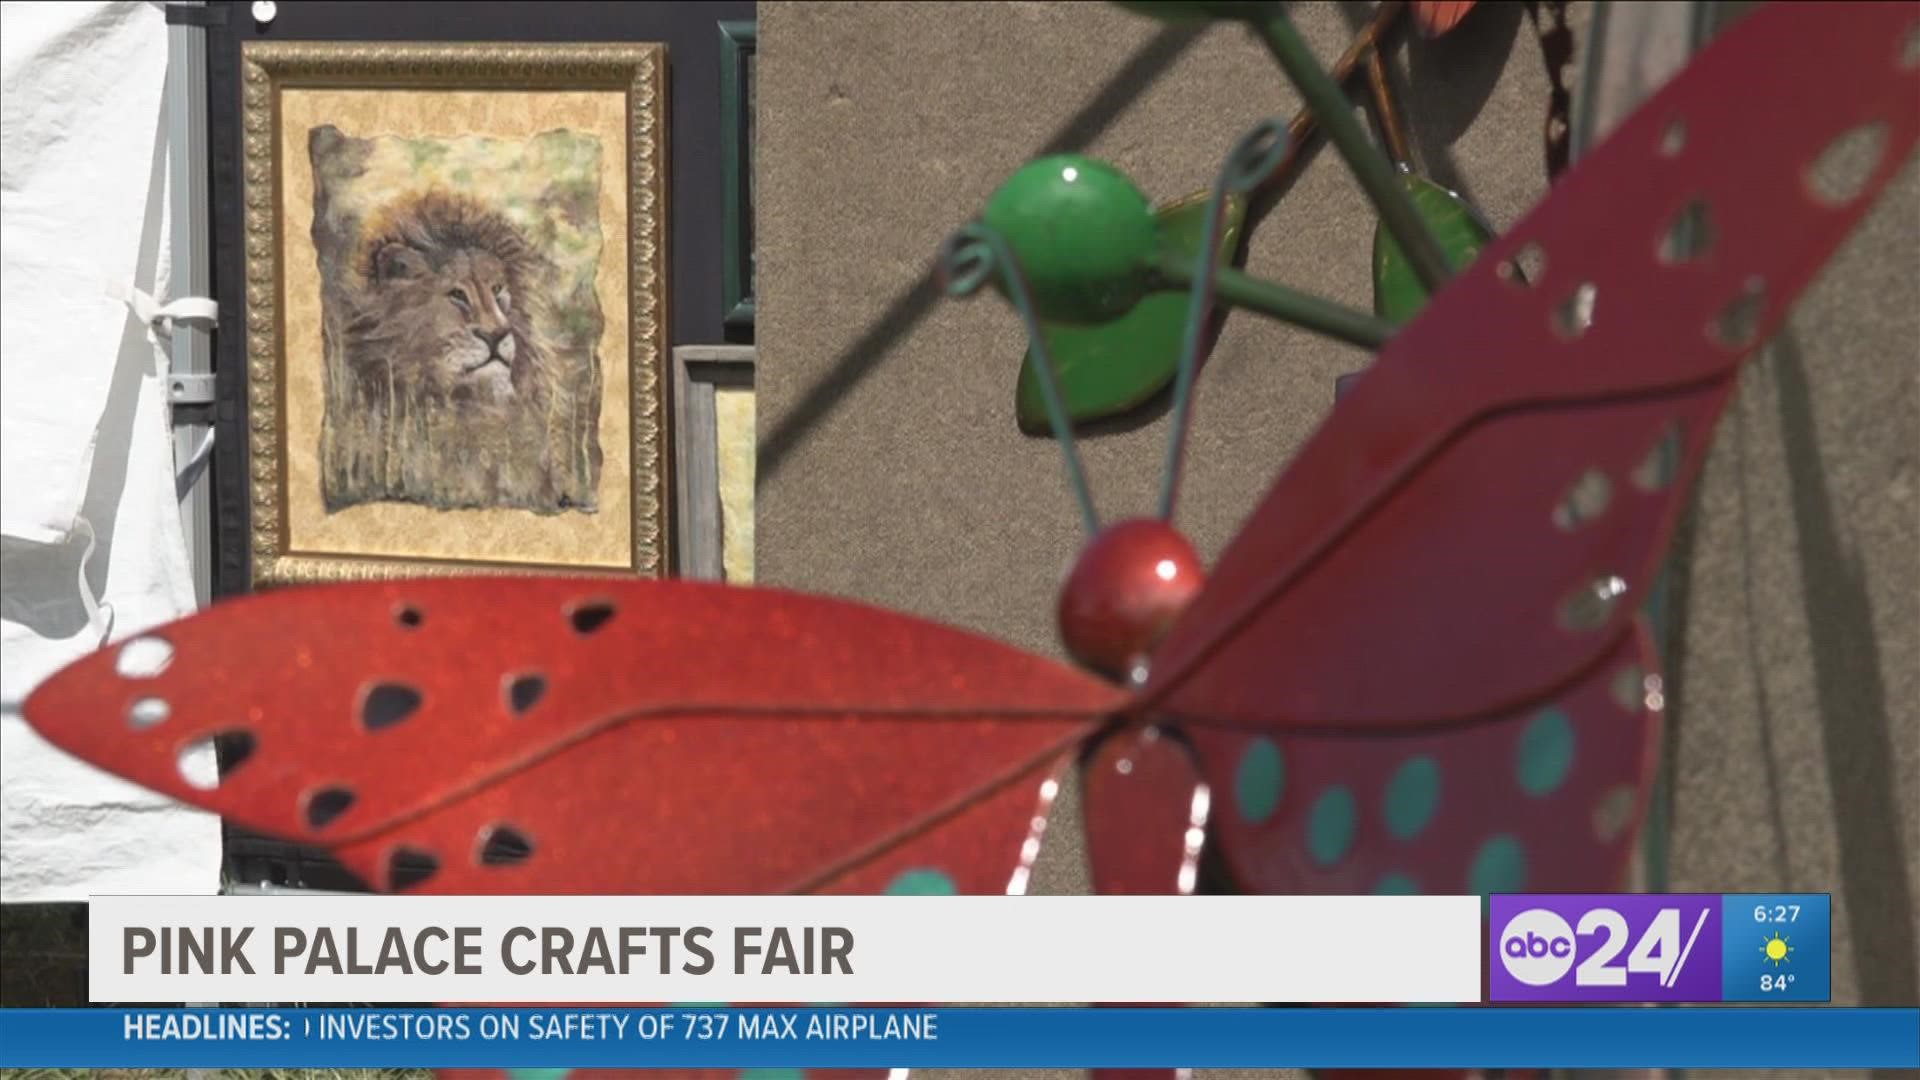 The 50th Pink Palace Crafts Fair features a petting zoo, bouncy houses and repeat customers buying glass art. The event runs until Sunday, Sept. 25.